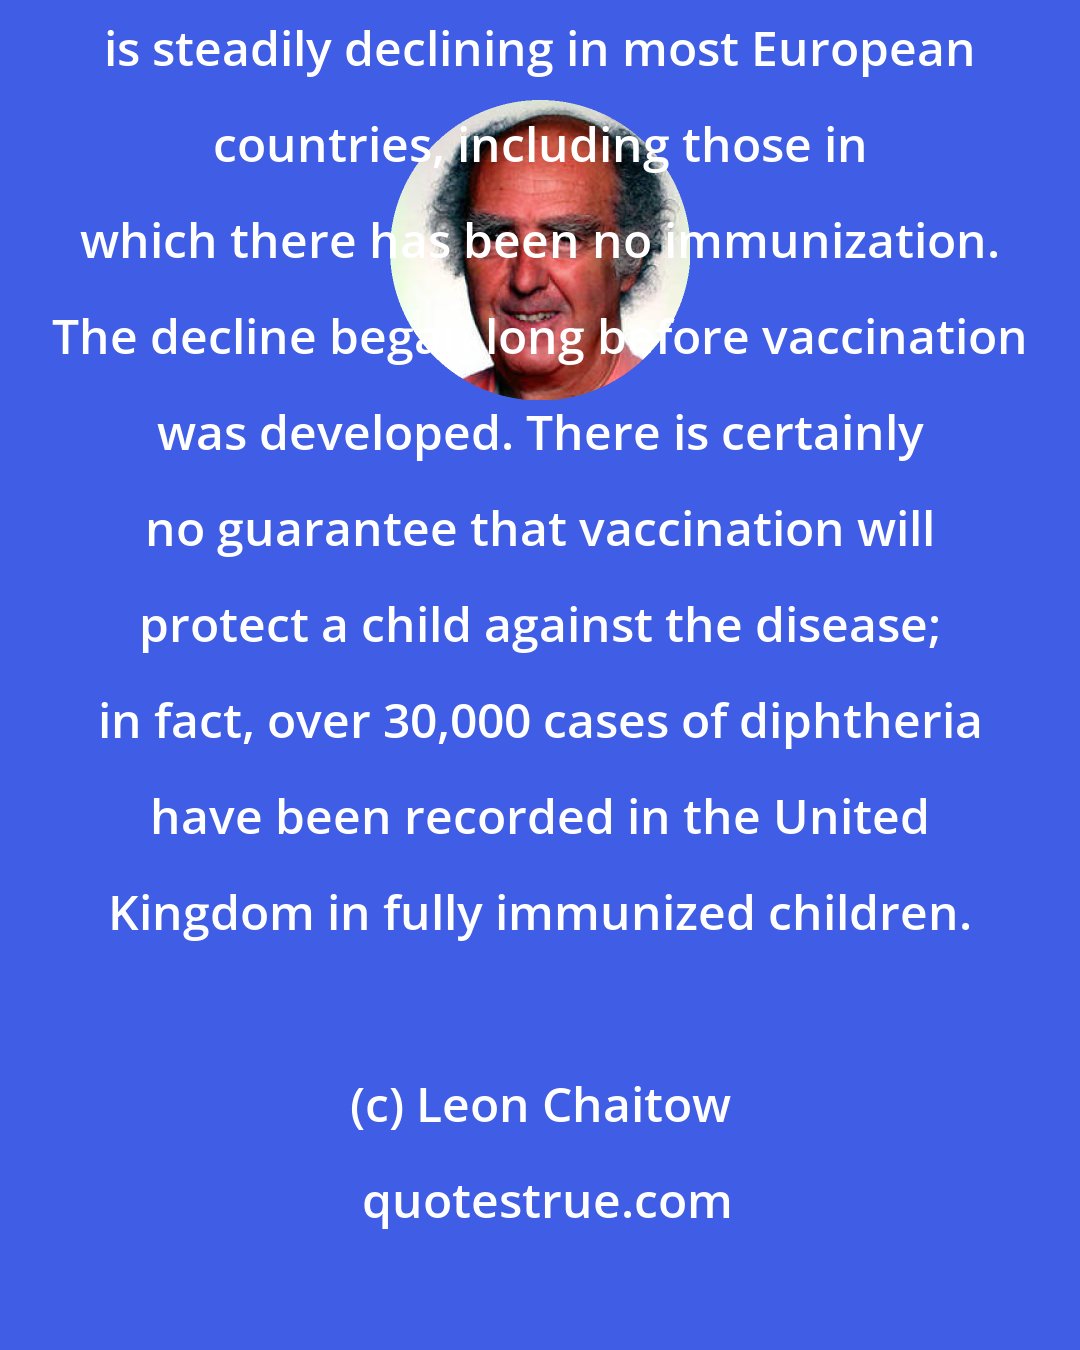 Leon Chaitow: Publications by the World Health Organization show that diphtheria is steadily declining in most European countries, including those in which there has been no immunization. The decline began long before vaccination was developed. There is certainly no guarantee that vaccination will protect a child against the disease; in fact, over 30,000 cases of diphtheria have been recorded in the United Kingdom in fully immunized children.